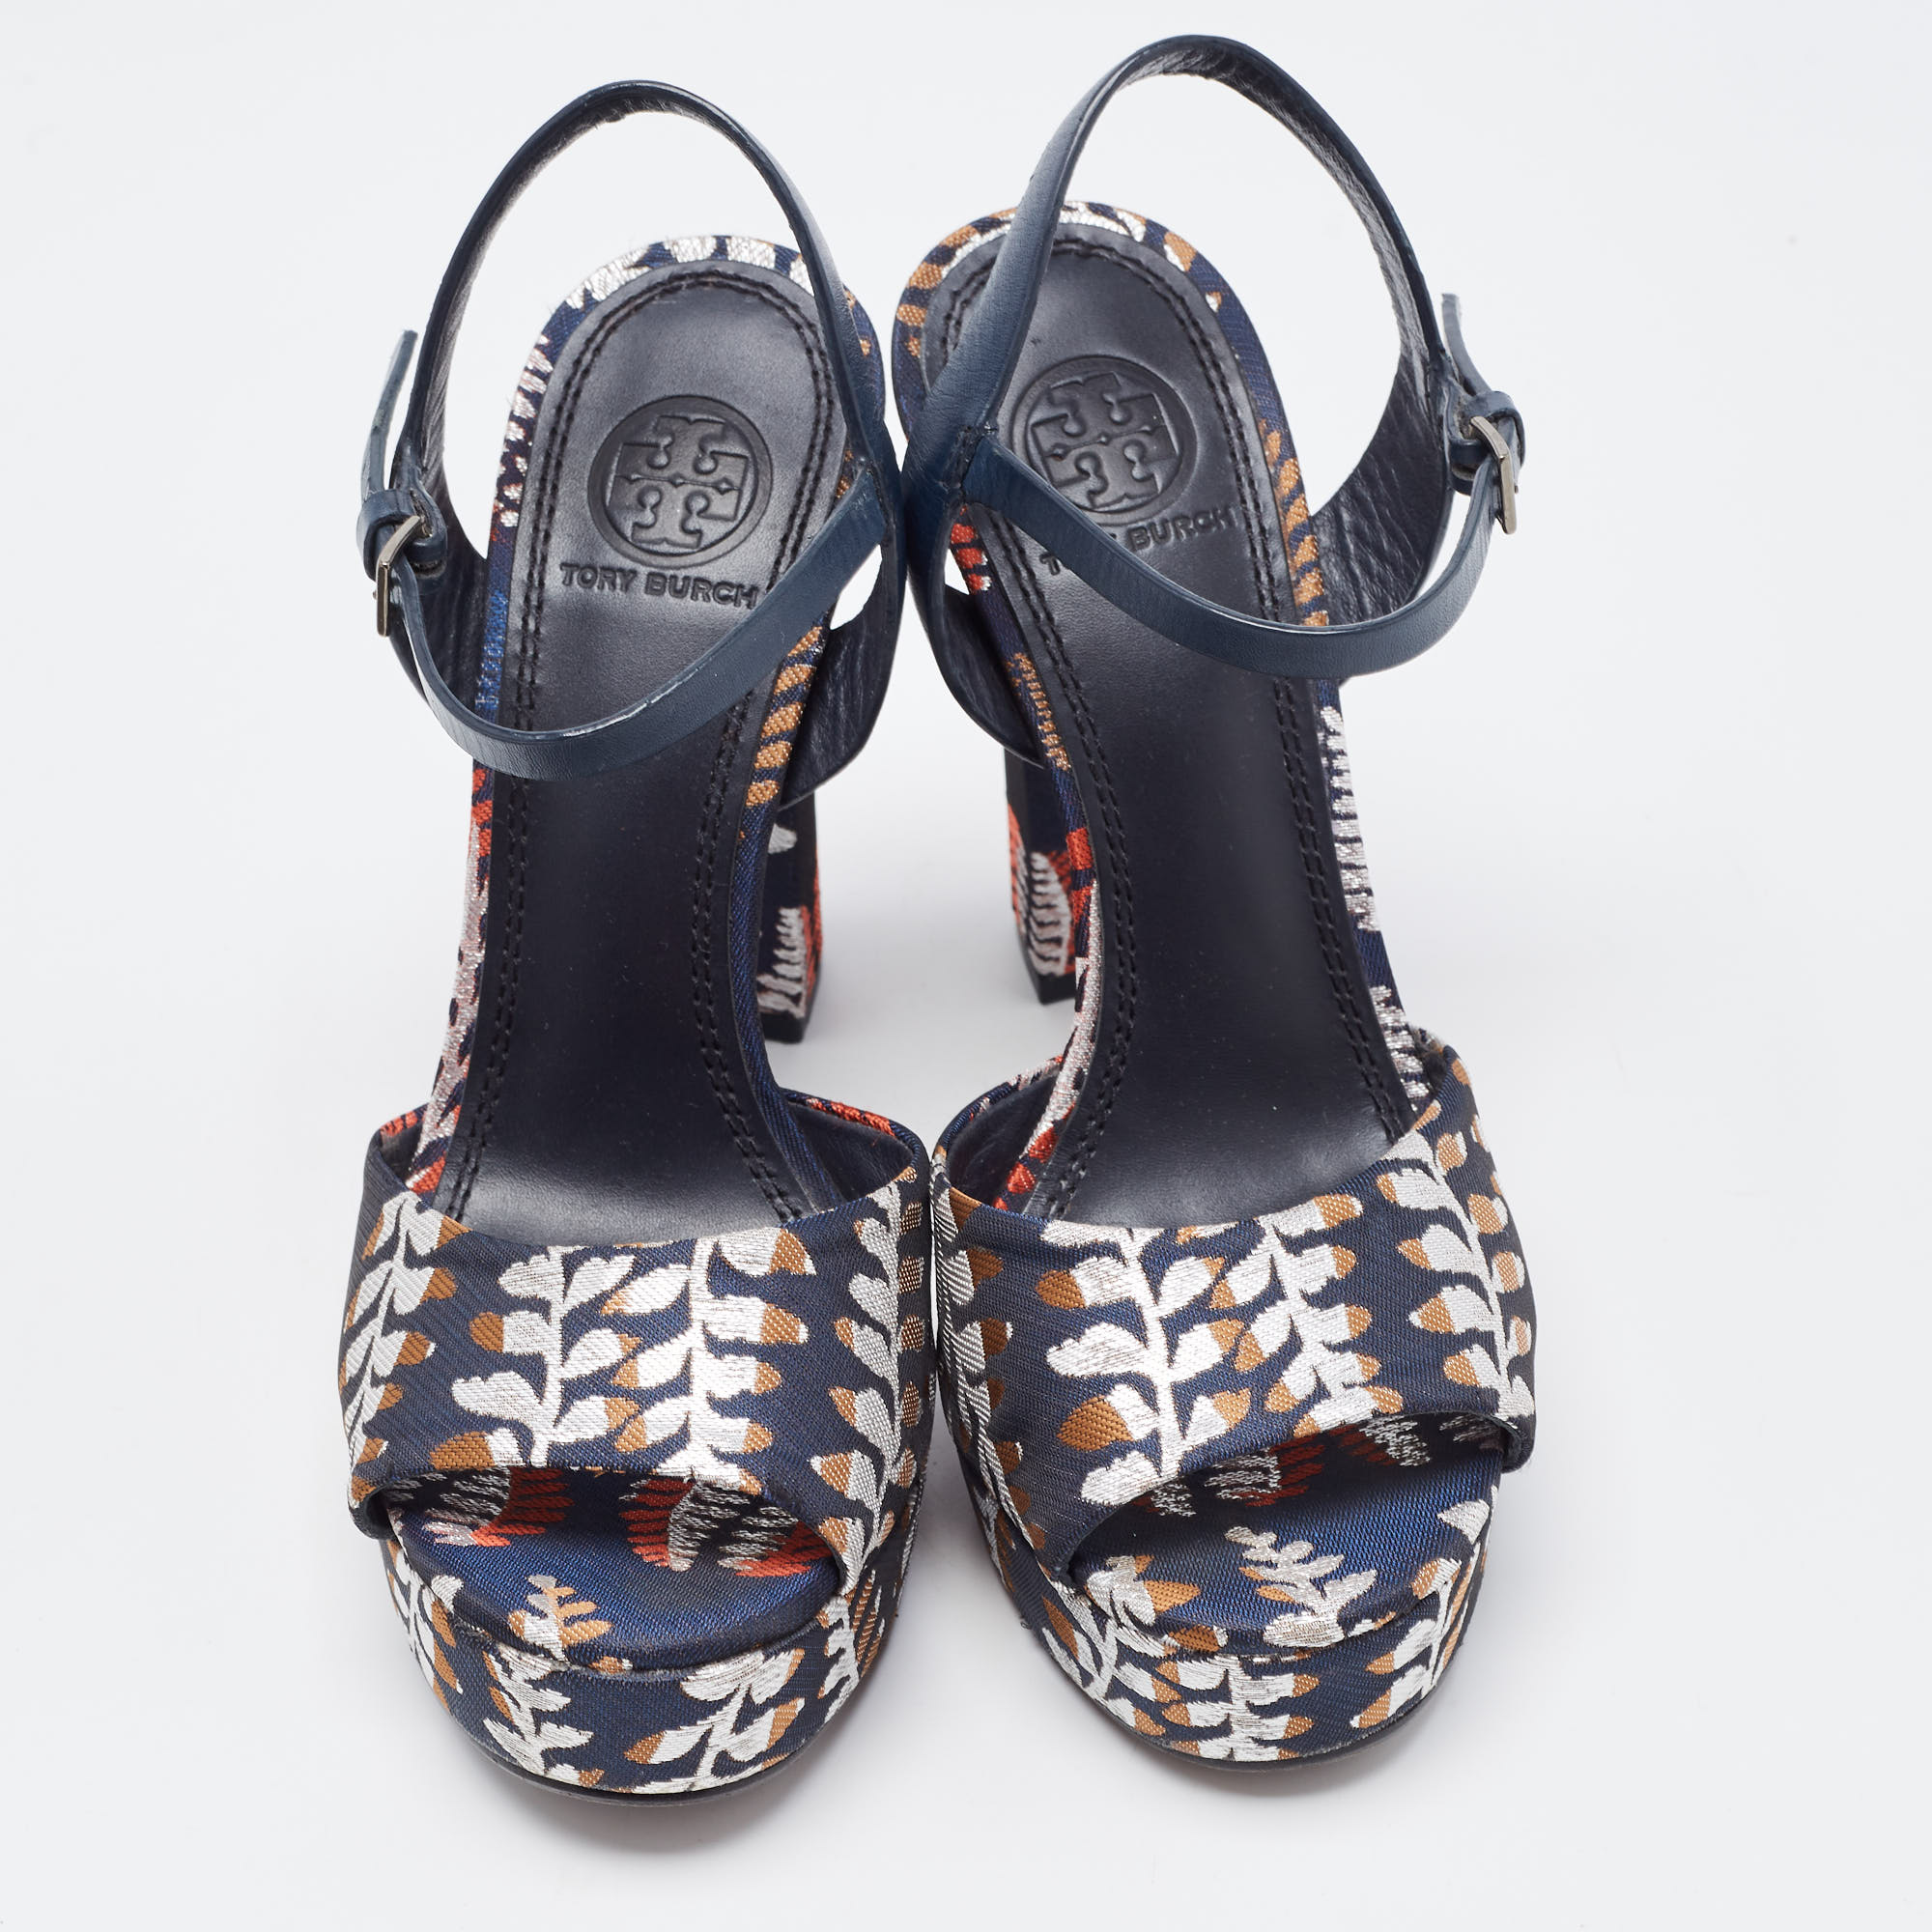 Tory Burch Navy Blue Leather And Brocade Fabric Platform Ankle Strap Sandals Size 36.5